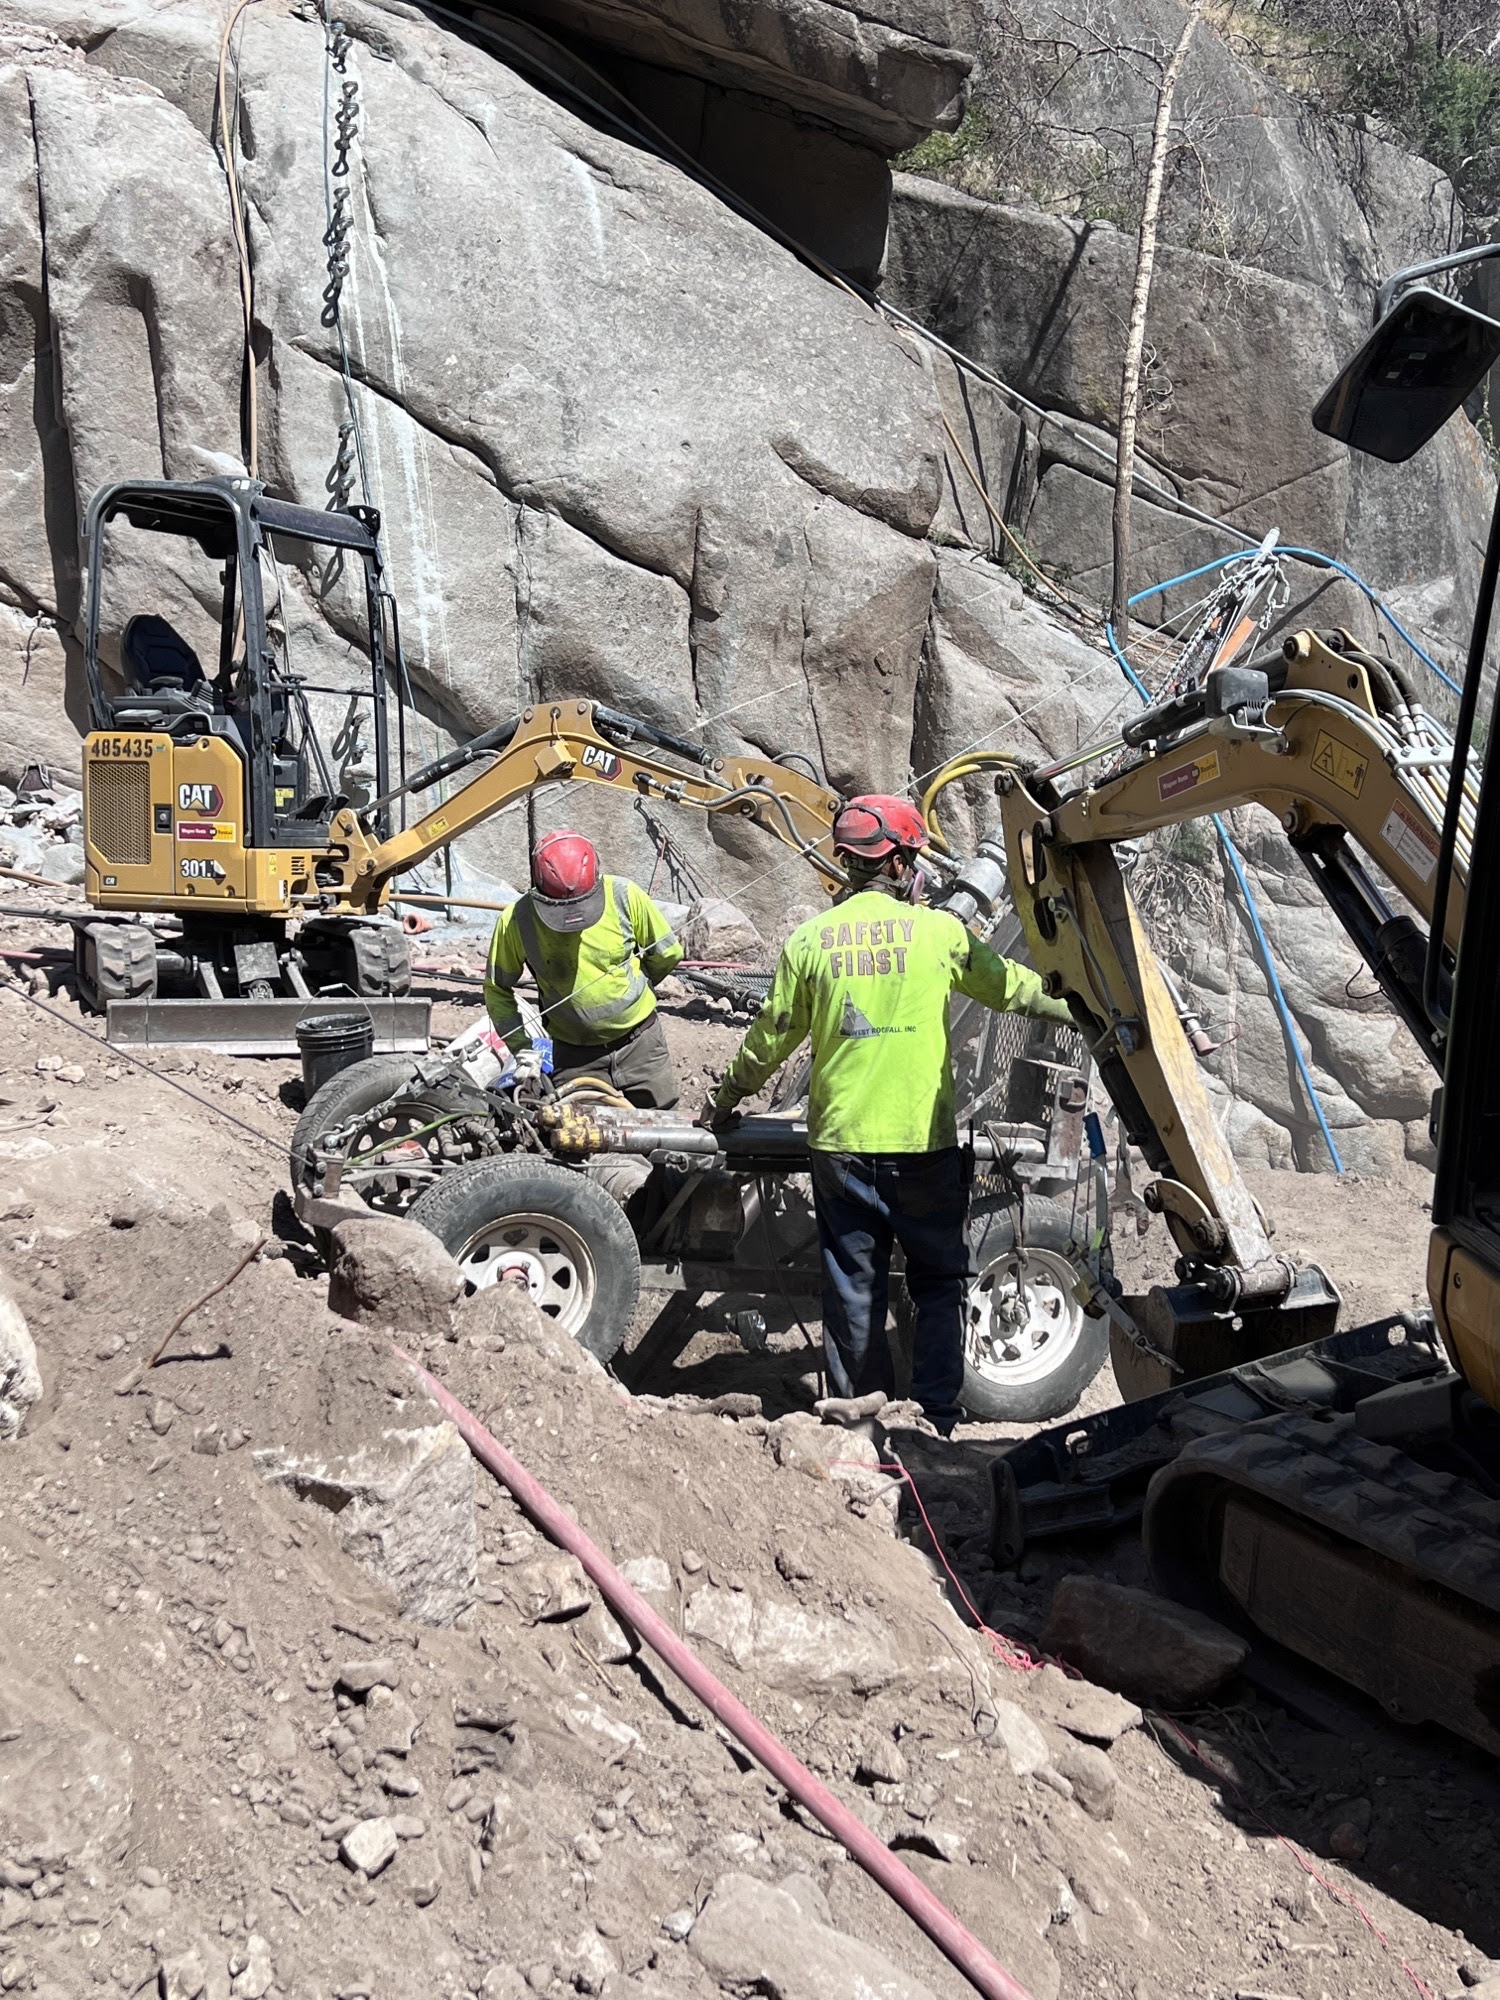 Crews preparing equipment to haul up the side of a rockface detail image